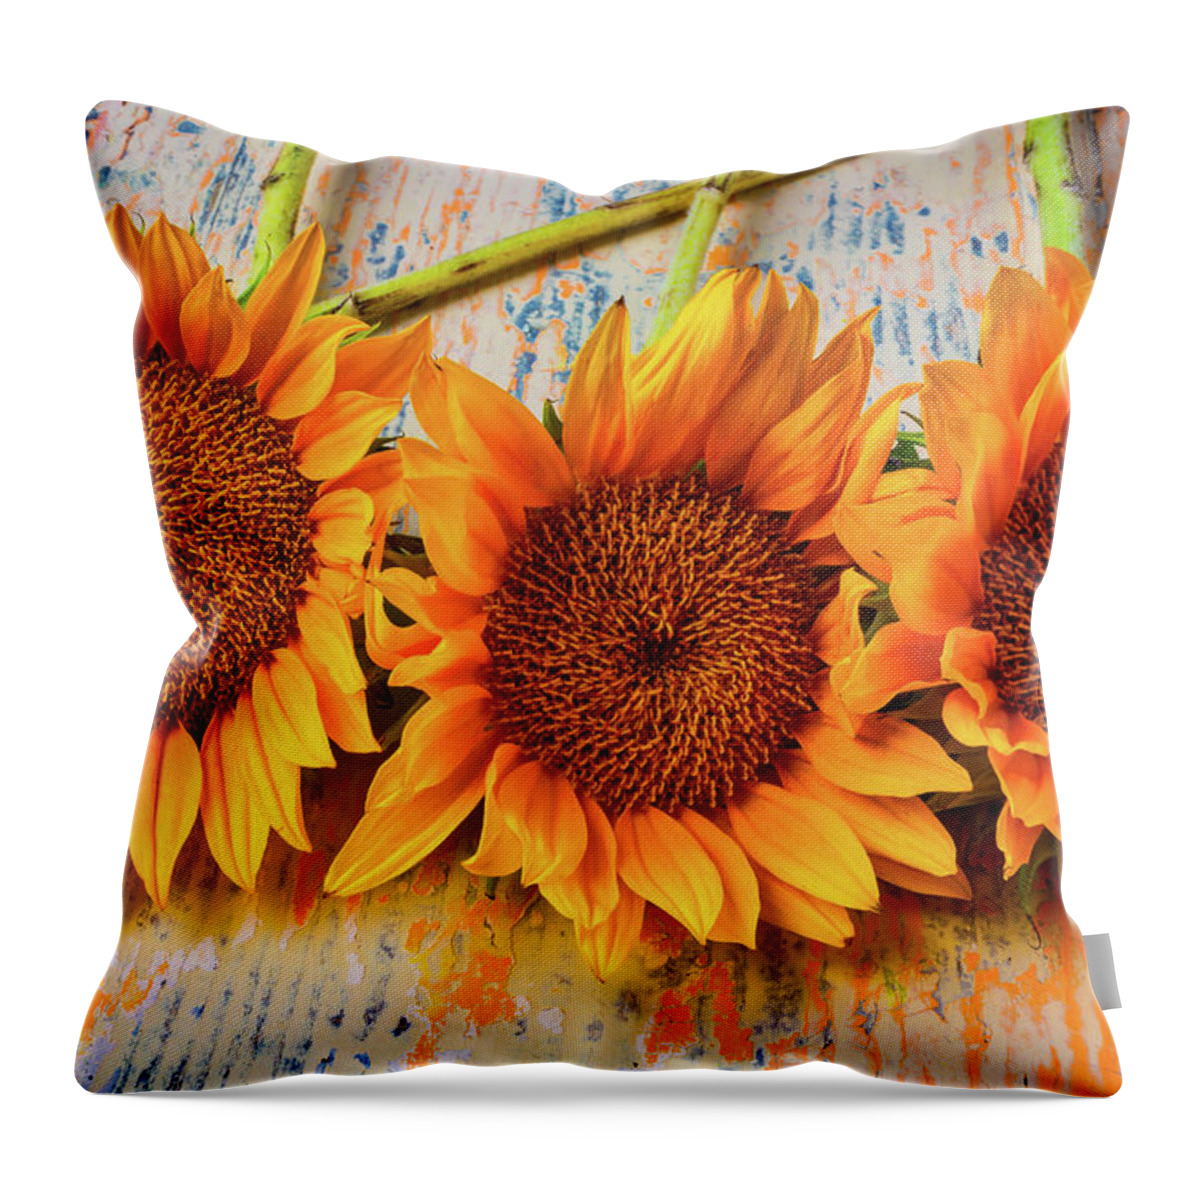 Mood Throw Pillow featuring the photograph Three Graphic Sunflowers by Garry Gay